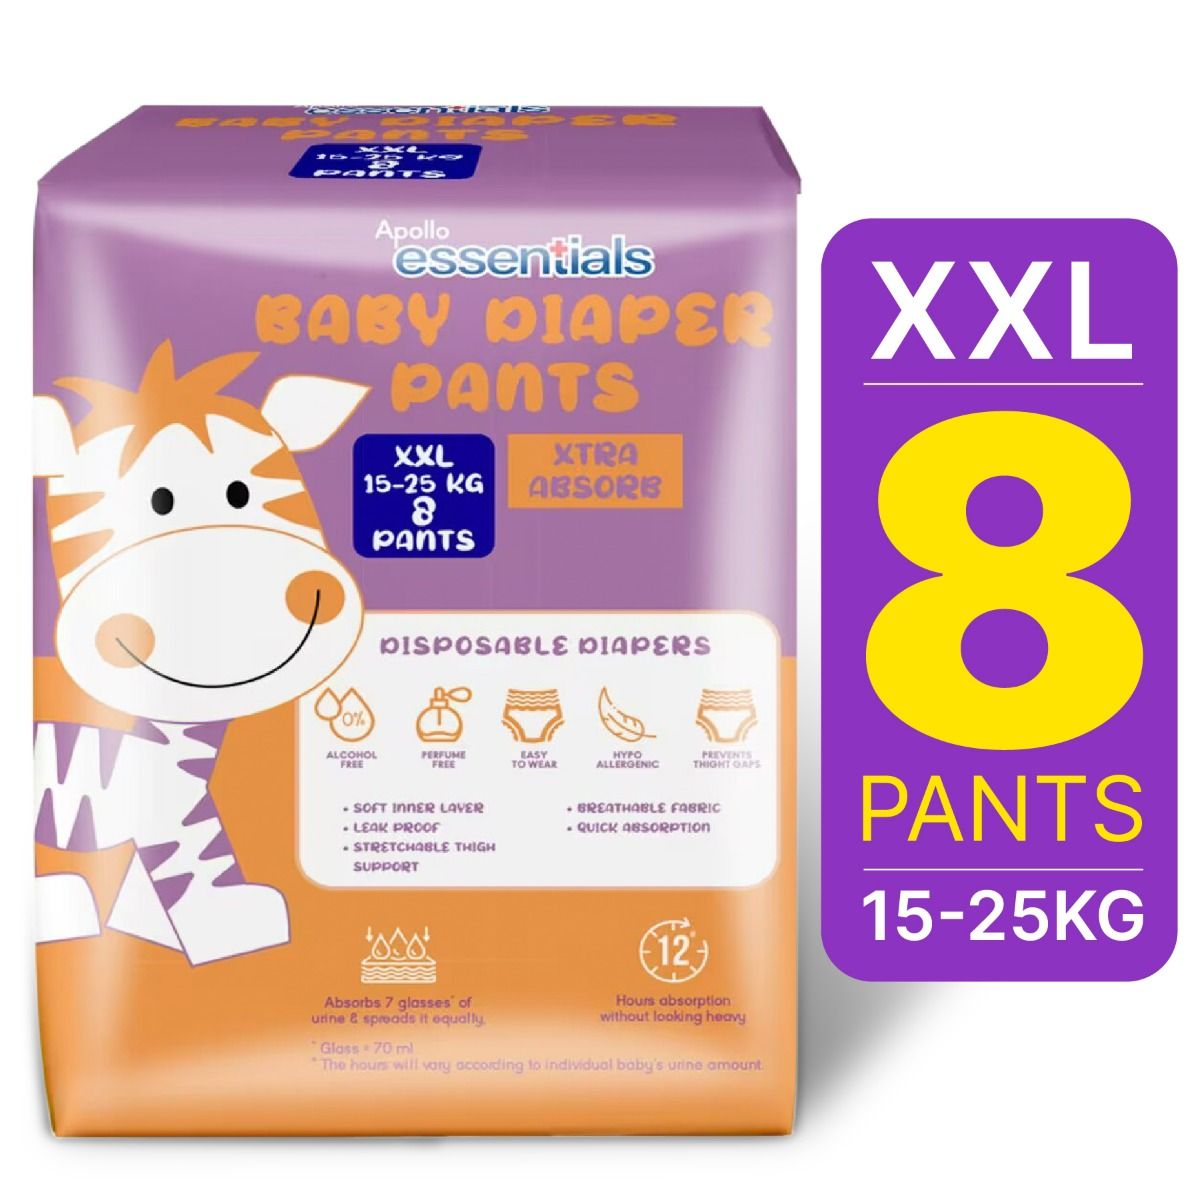 Buy Apollo Essentials Extra Absorb Baby Diaper Pants XXL, 8 Count Online